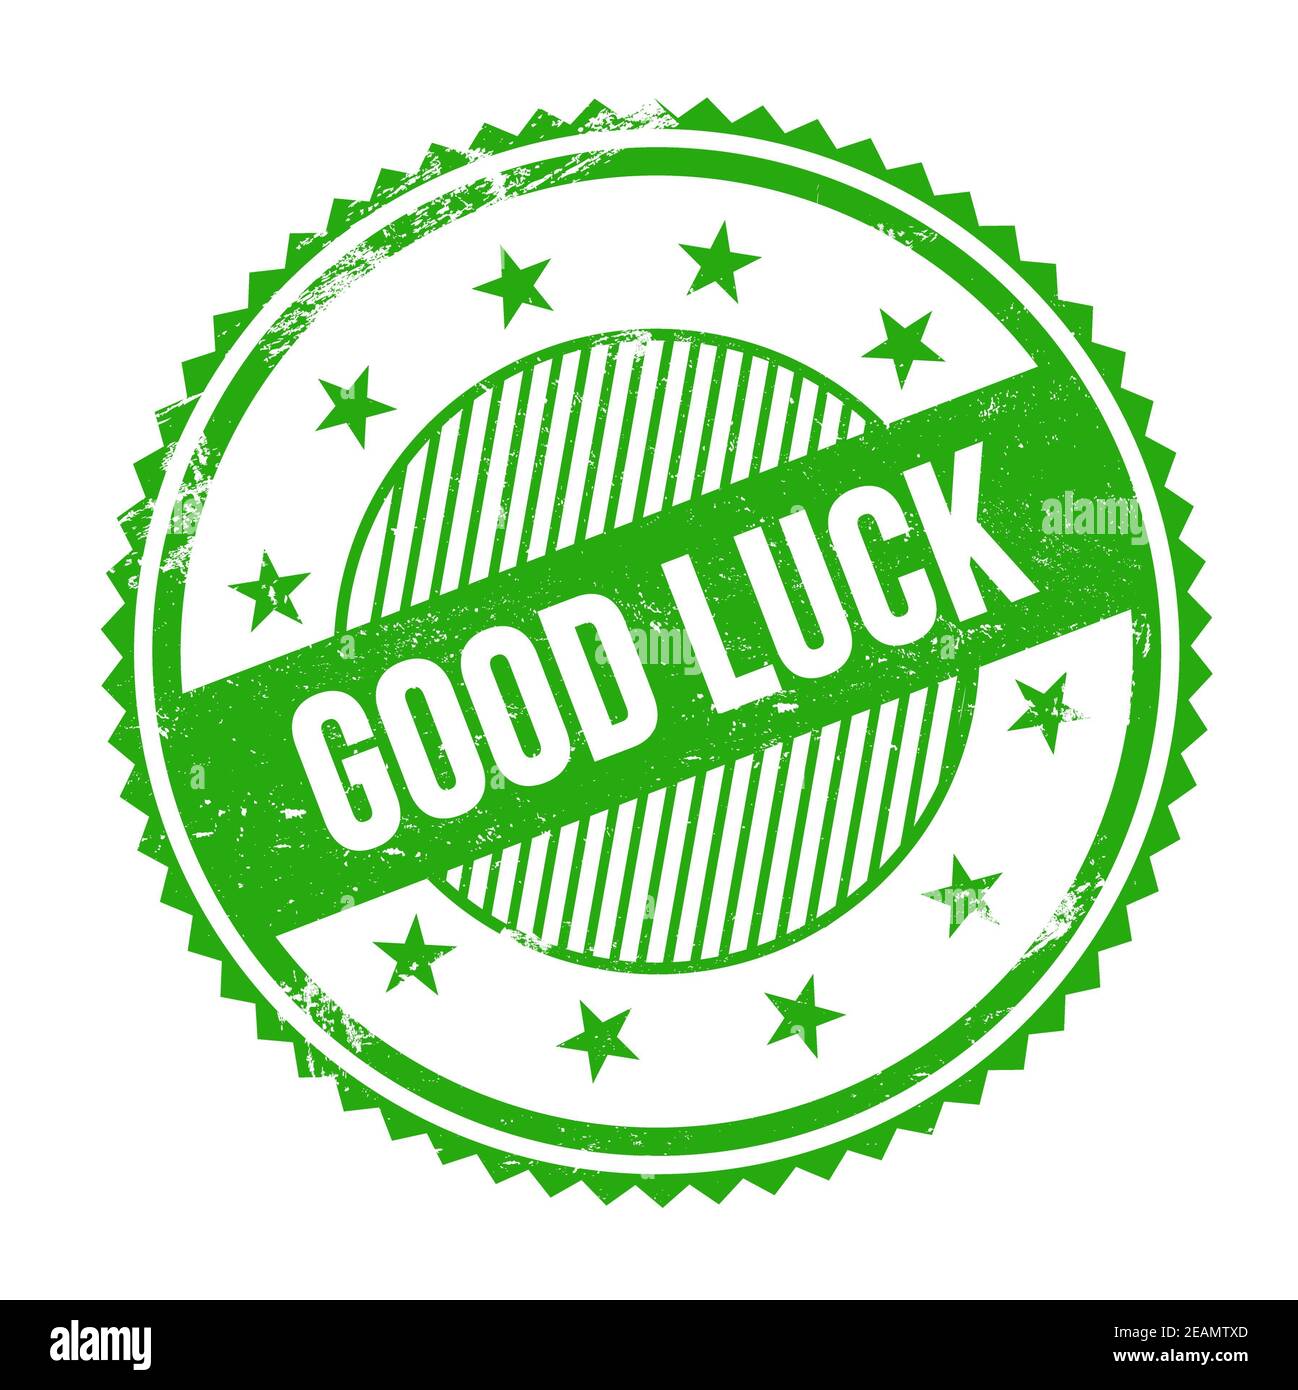 GOOD LUCK text written on green grungy zig zag borders round stamp. Stock Photo